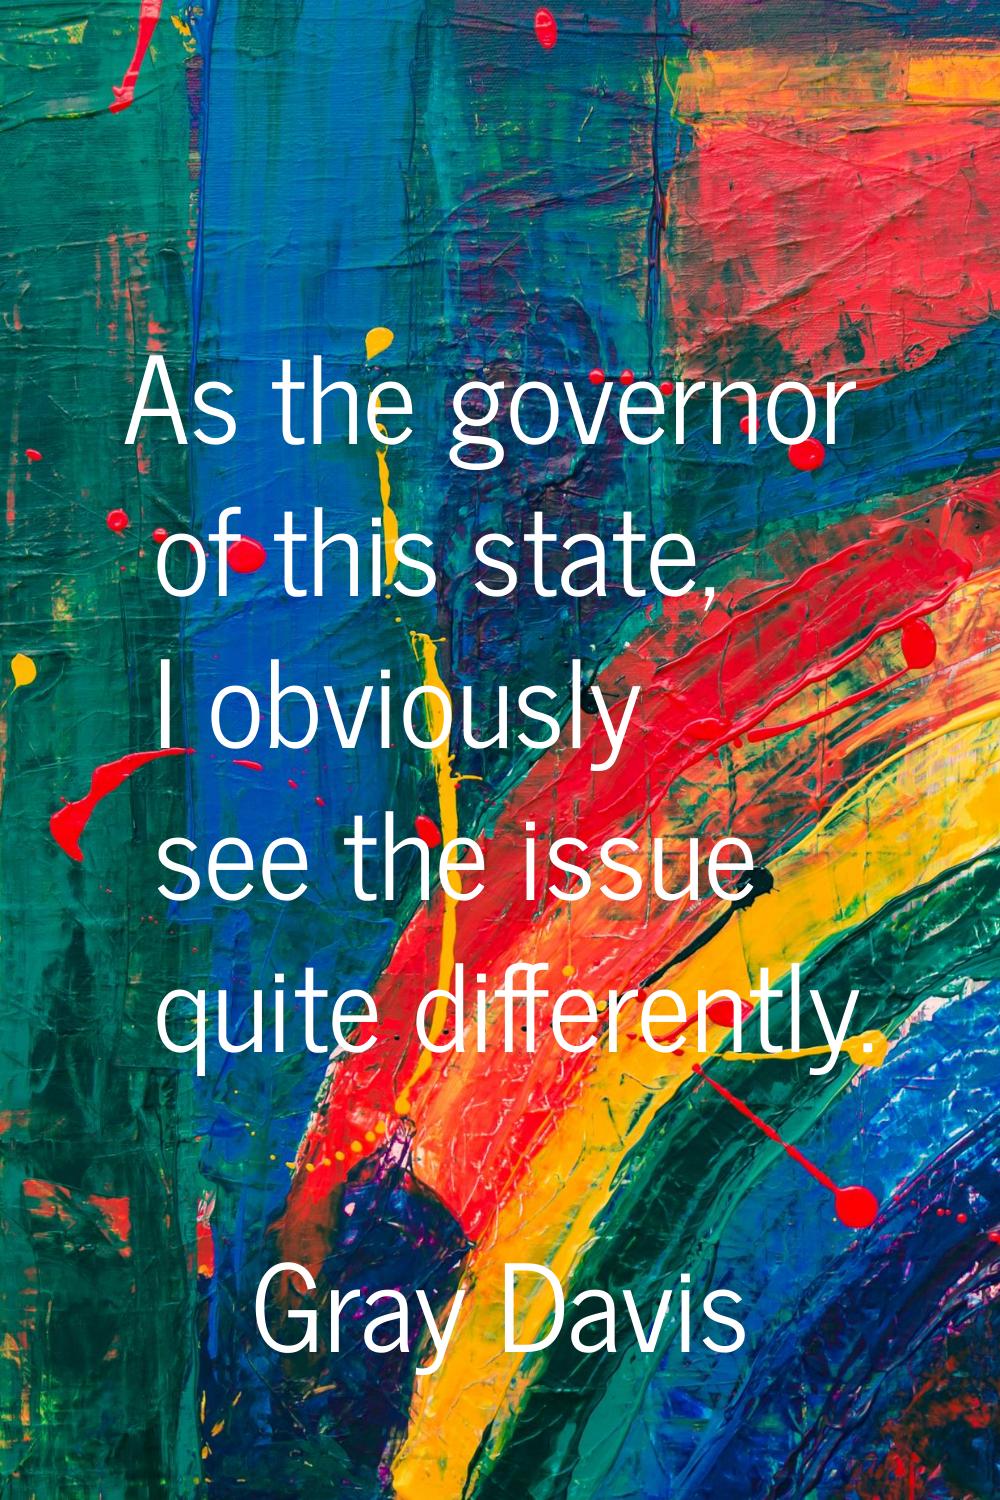 As the governor of this state, I obviously see the issue quite differently.